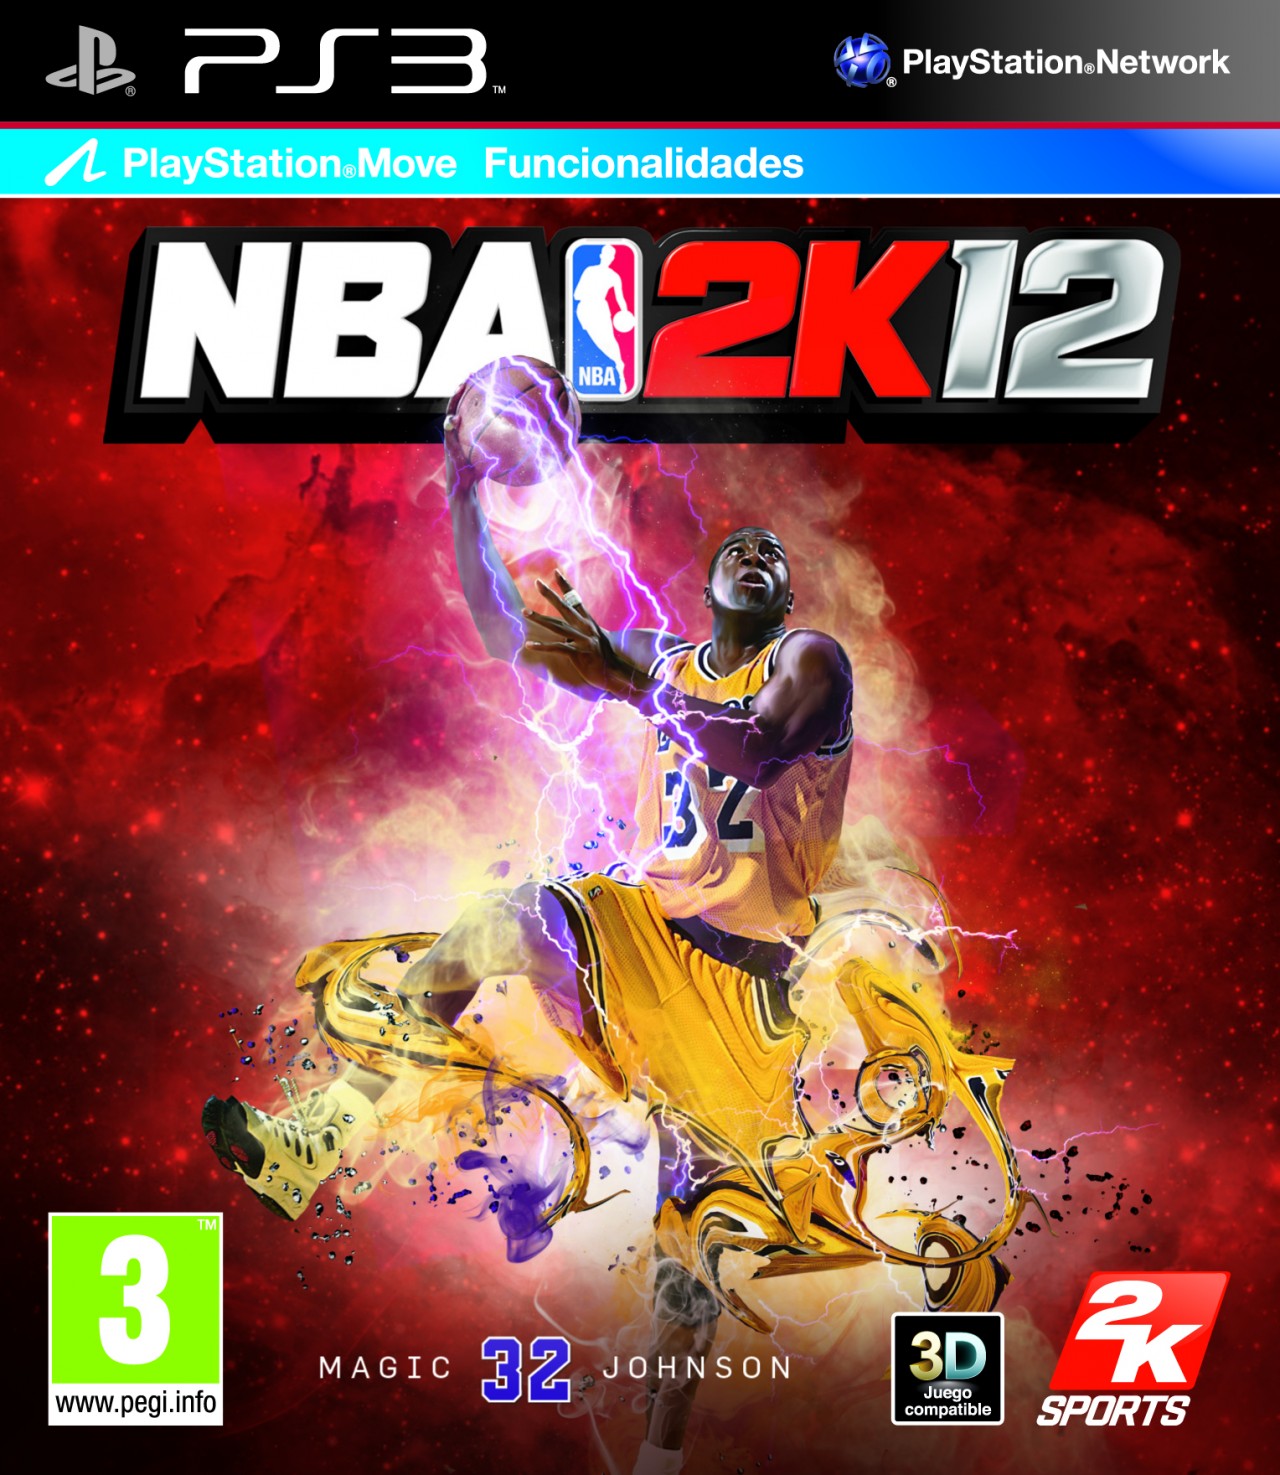 nba 2k12 pc requirements